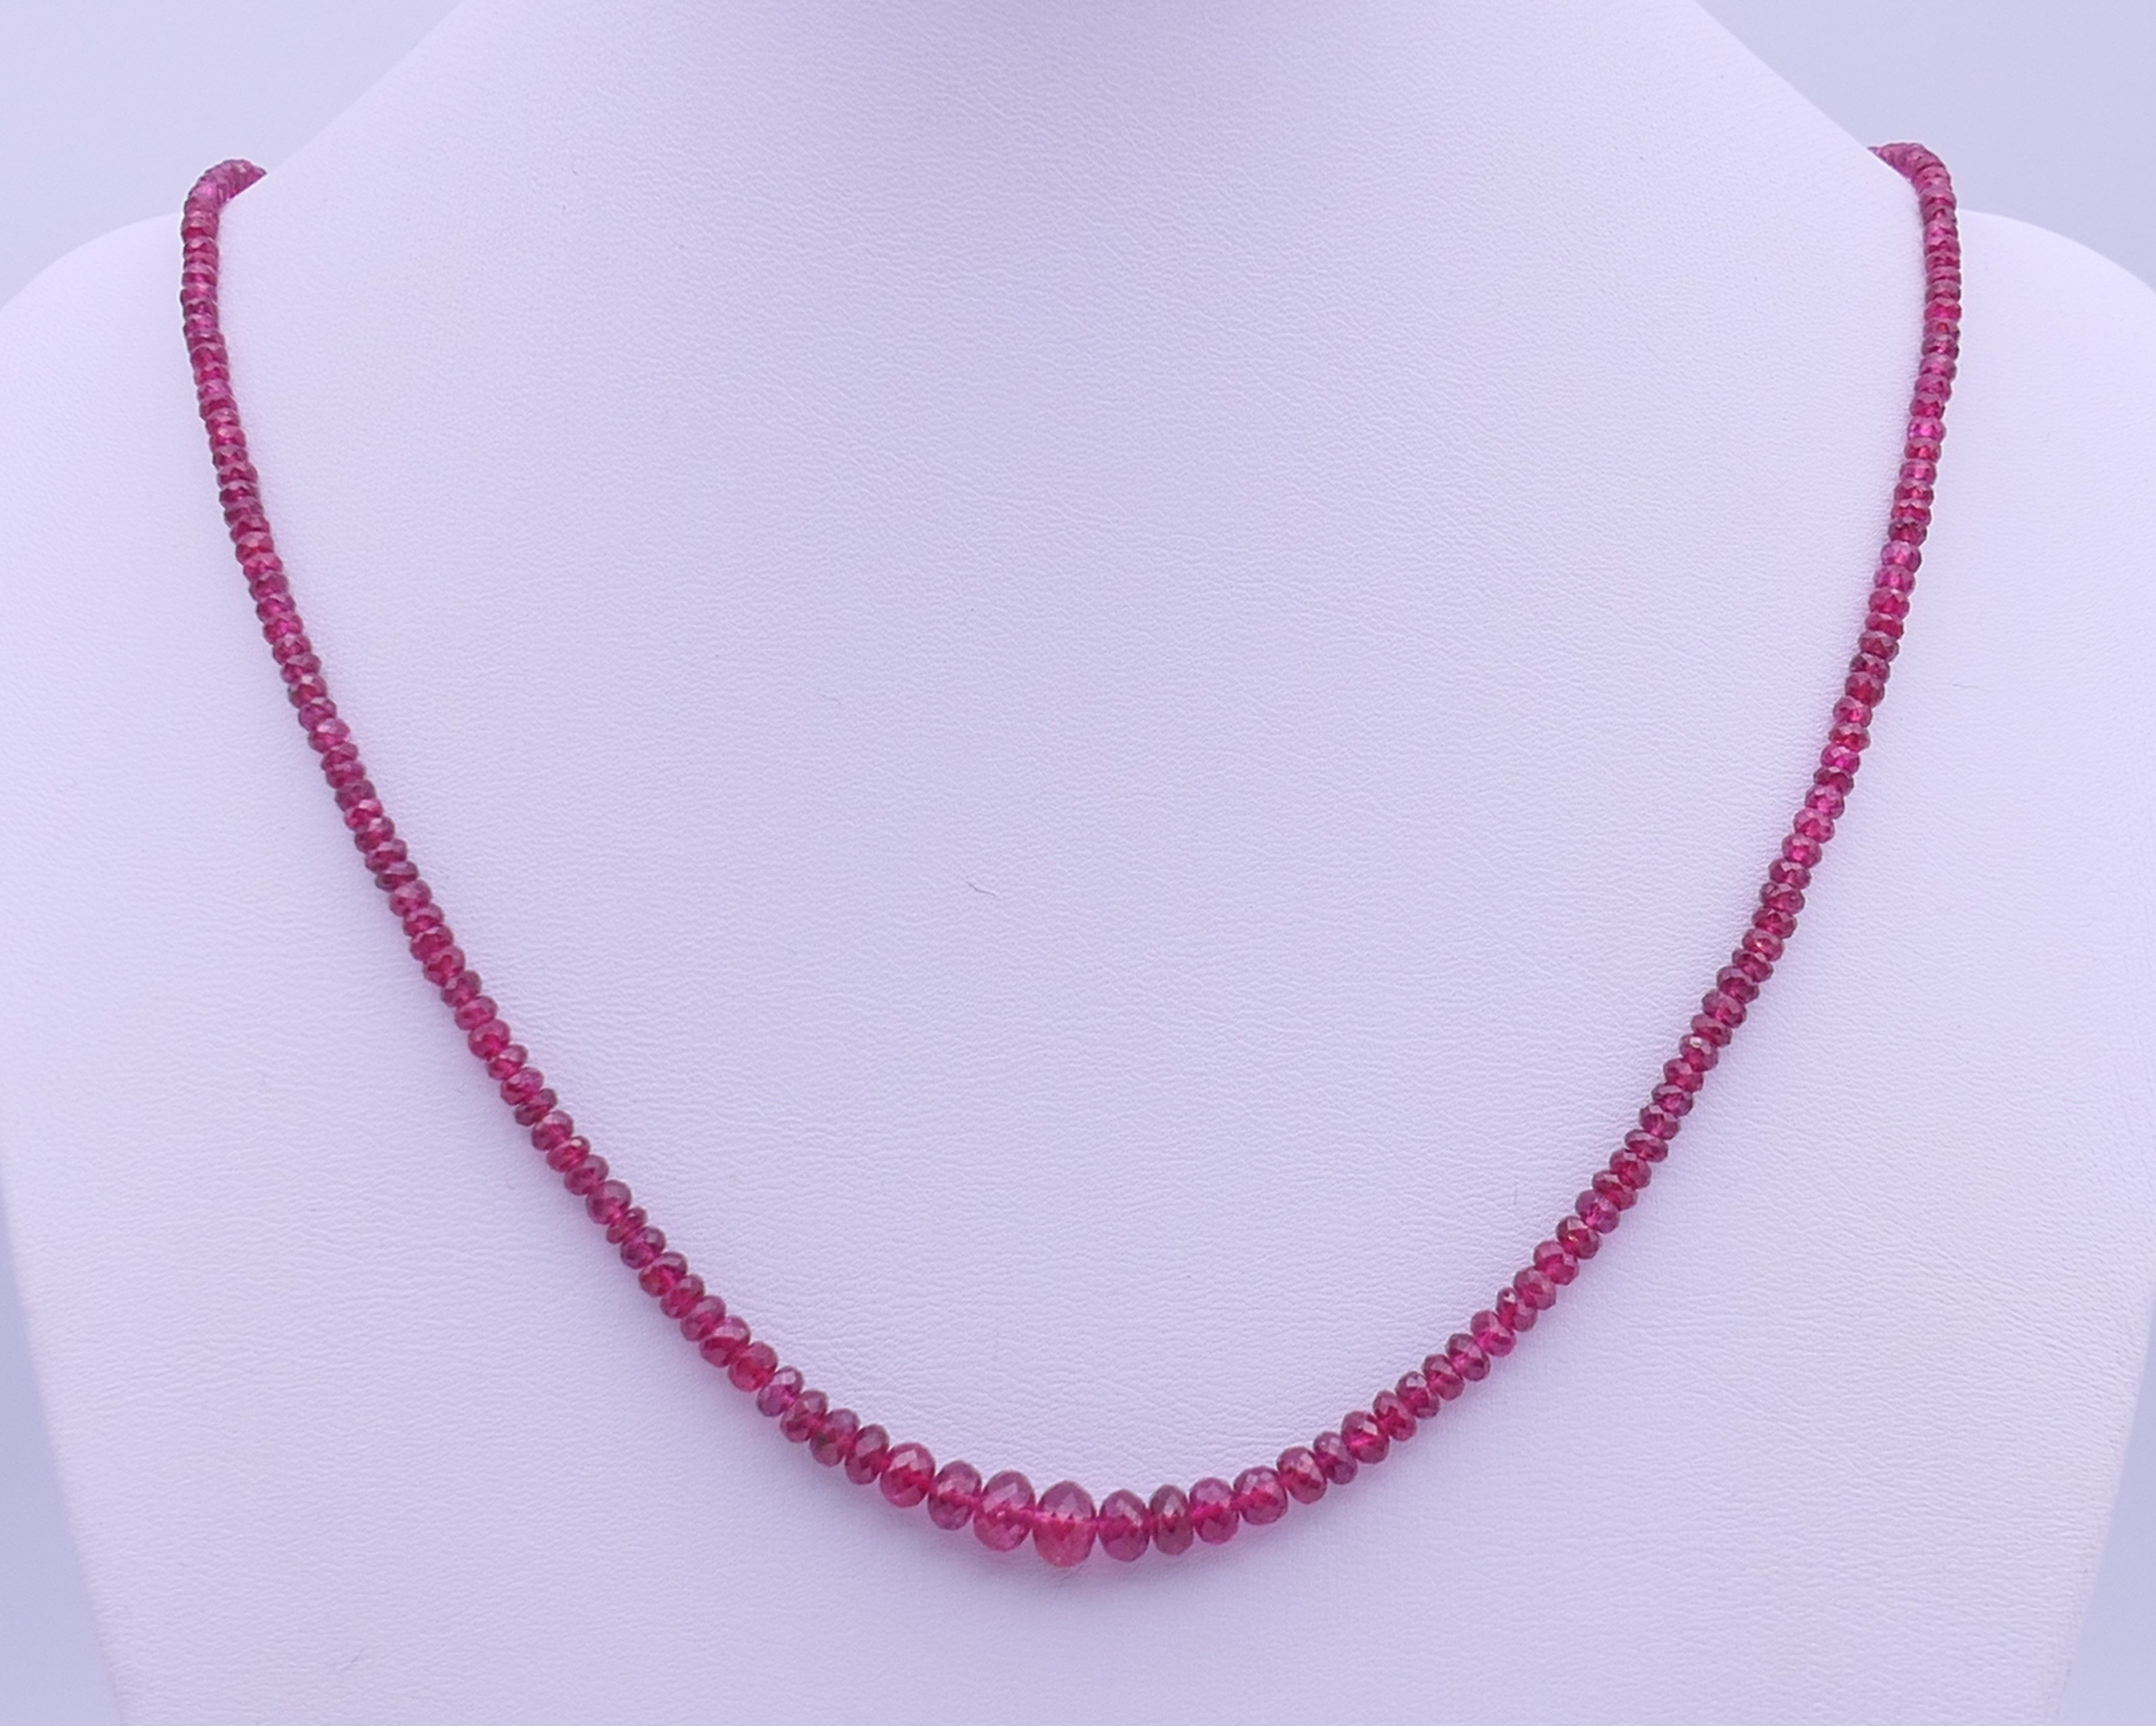 A red spinel bead necklace with 9 ct gold clasp. 50 cm long.